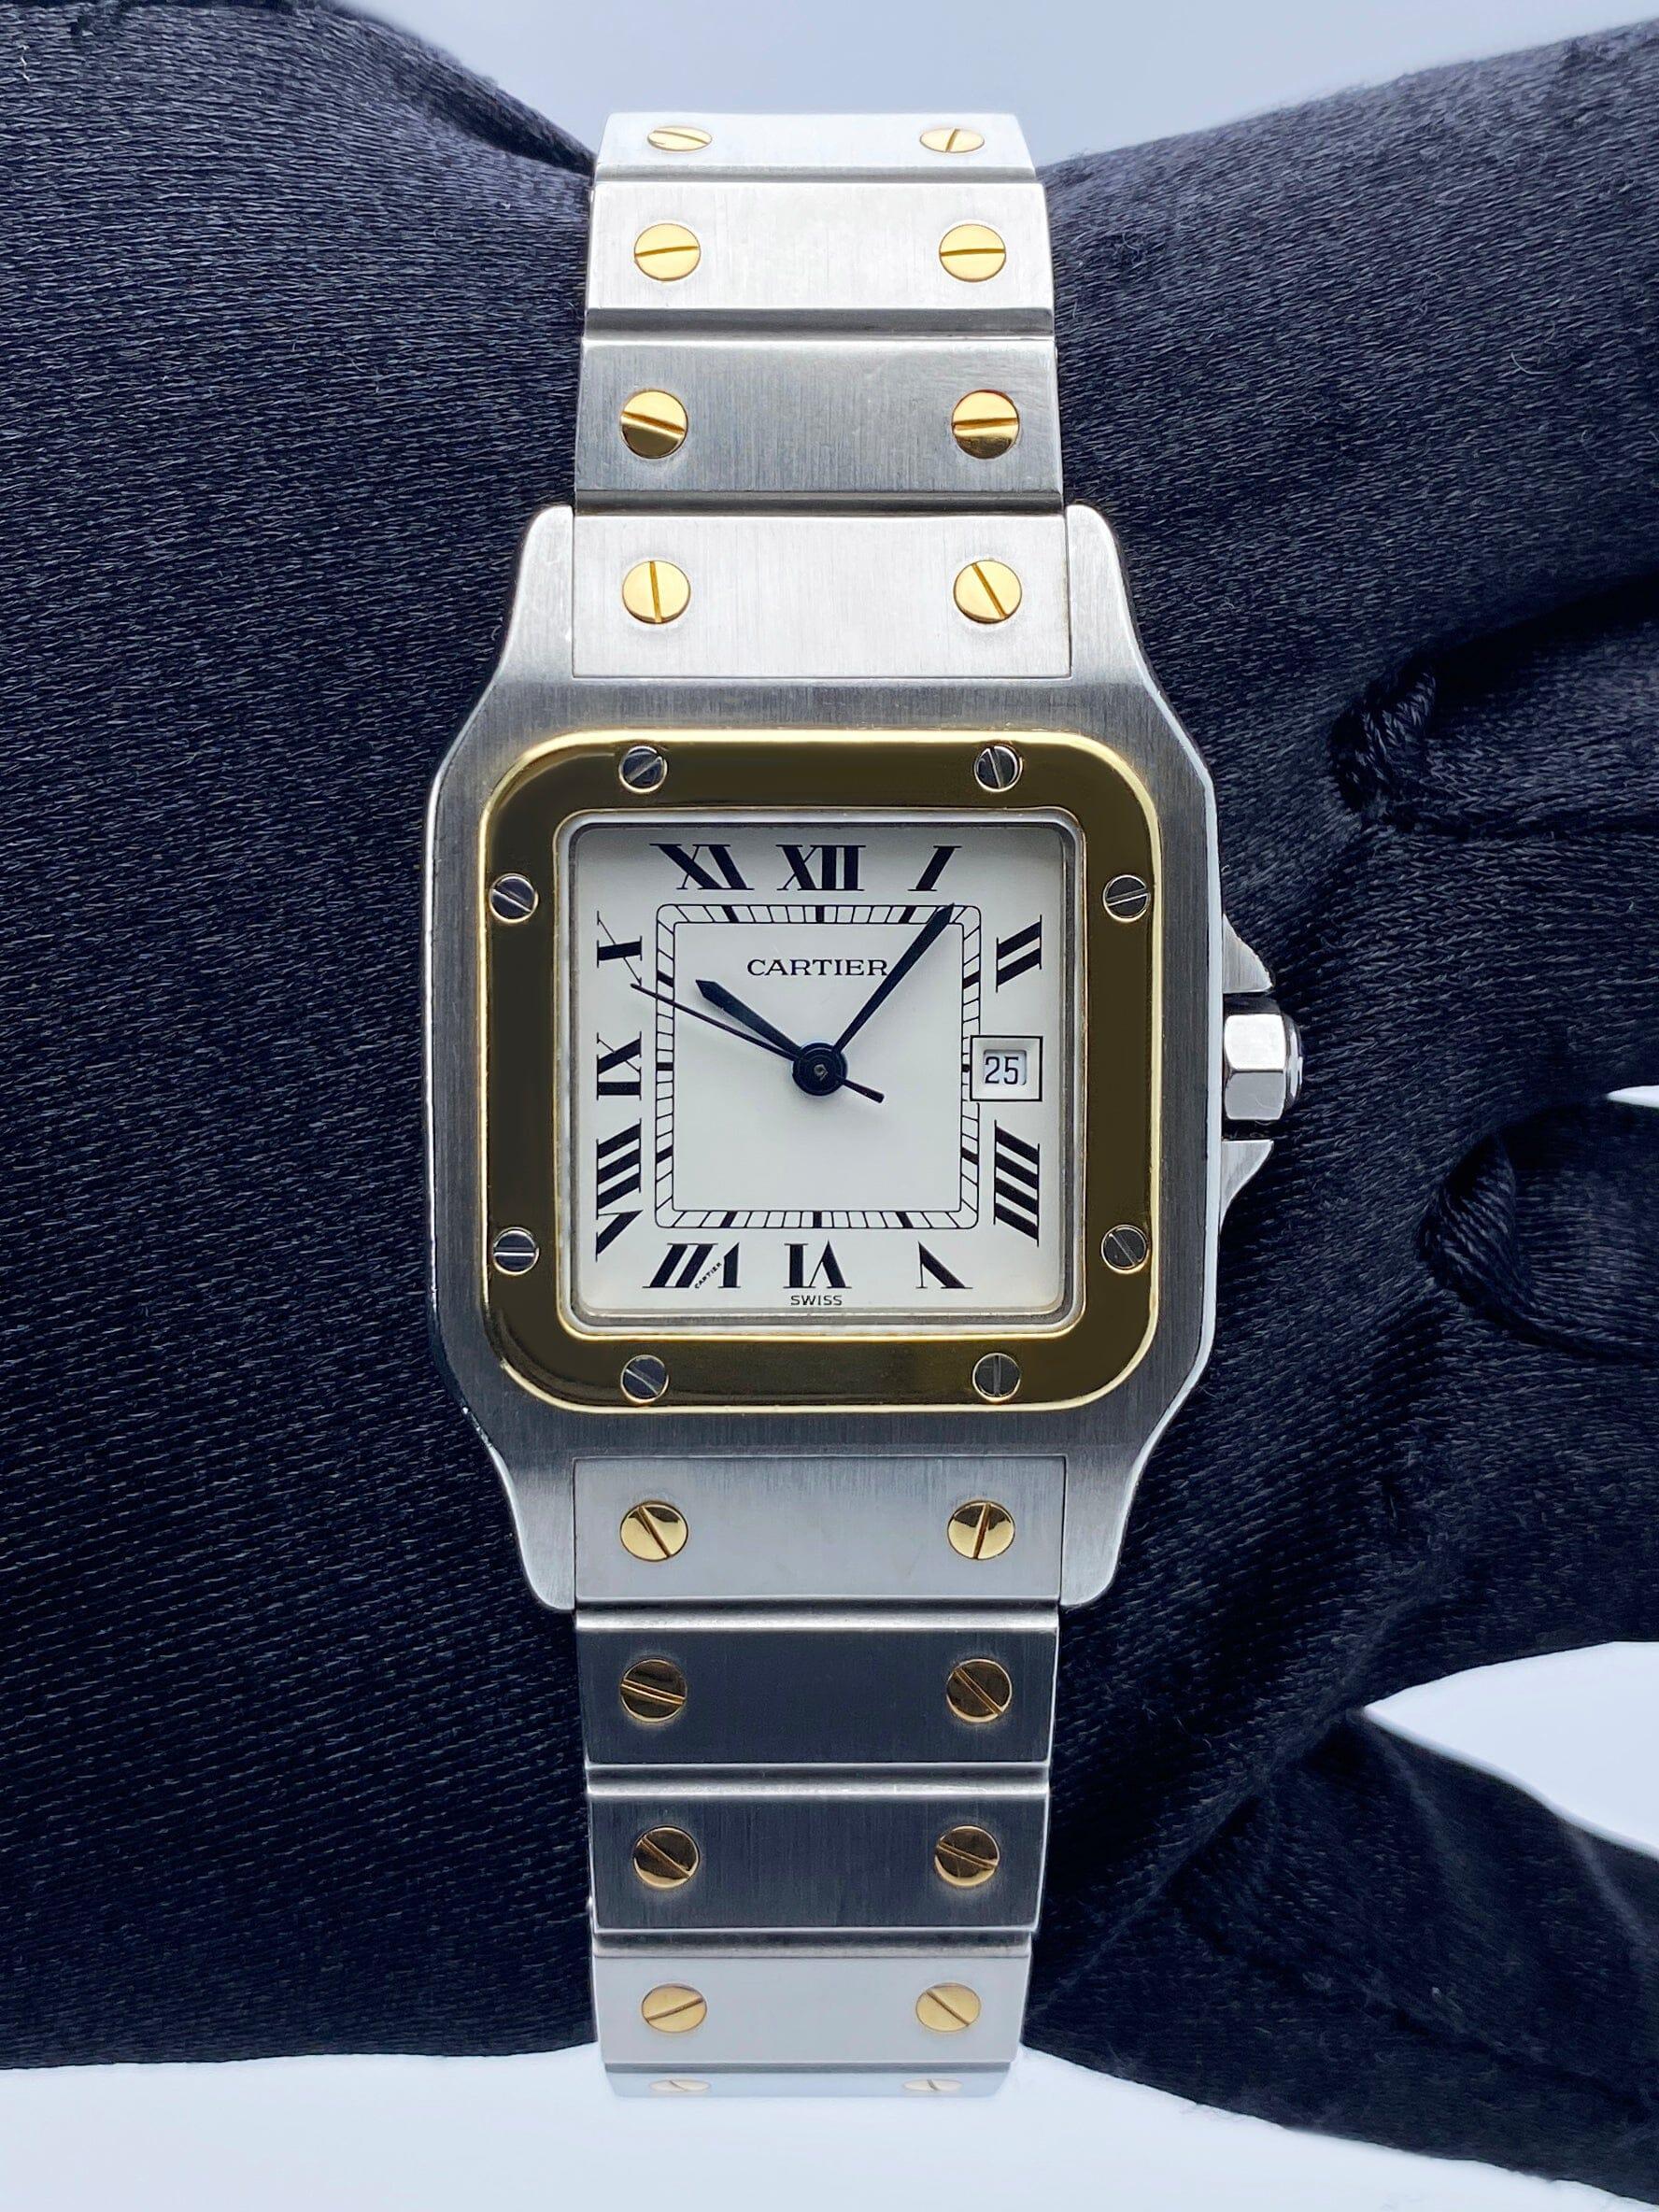 Cartier Santos Galbee¬†2961 Watch. 29mm stainless steel case. 18K yellow gold fixed bezel.¬†Off-White dial with blue hands and Roman numeral hour marker. 18K yellow gold &¬†stainless steel bracelet with hidden butterfly¬†clasp. Will fit up to a